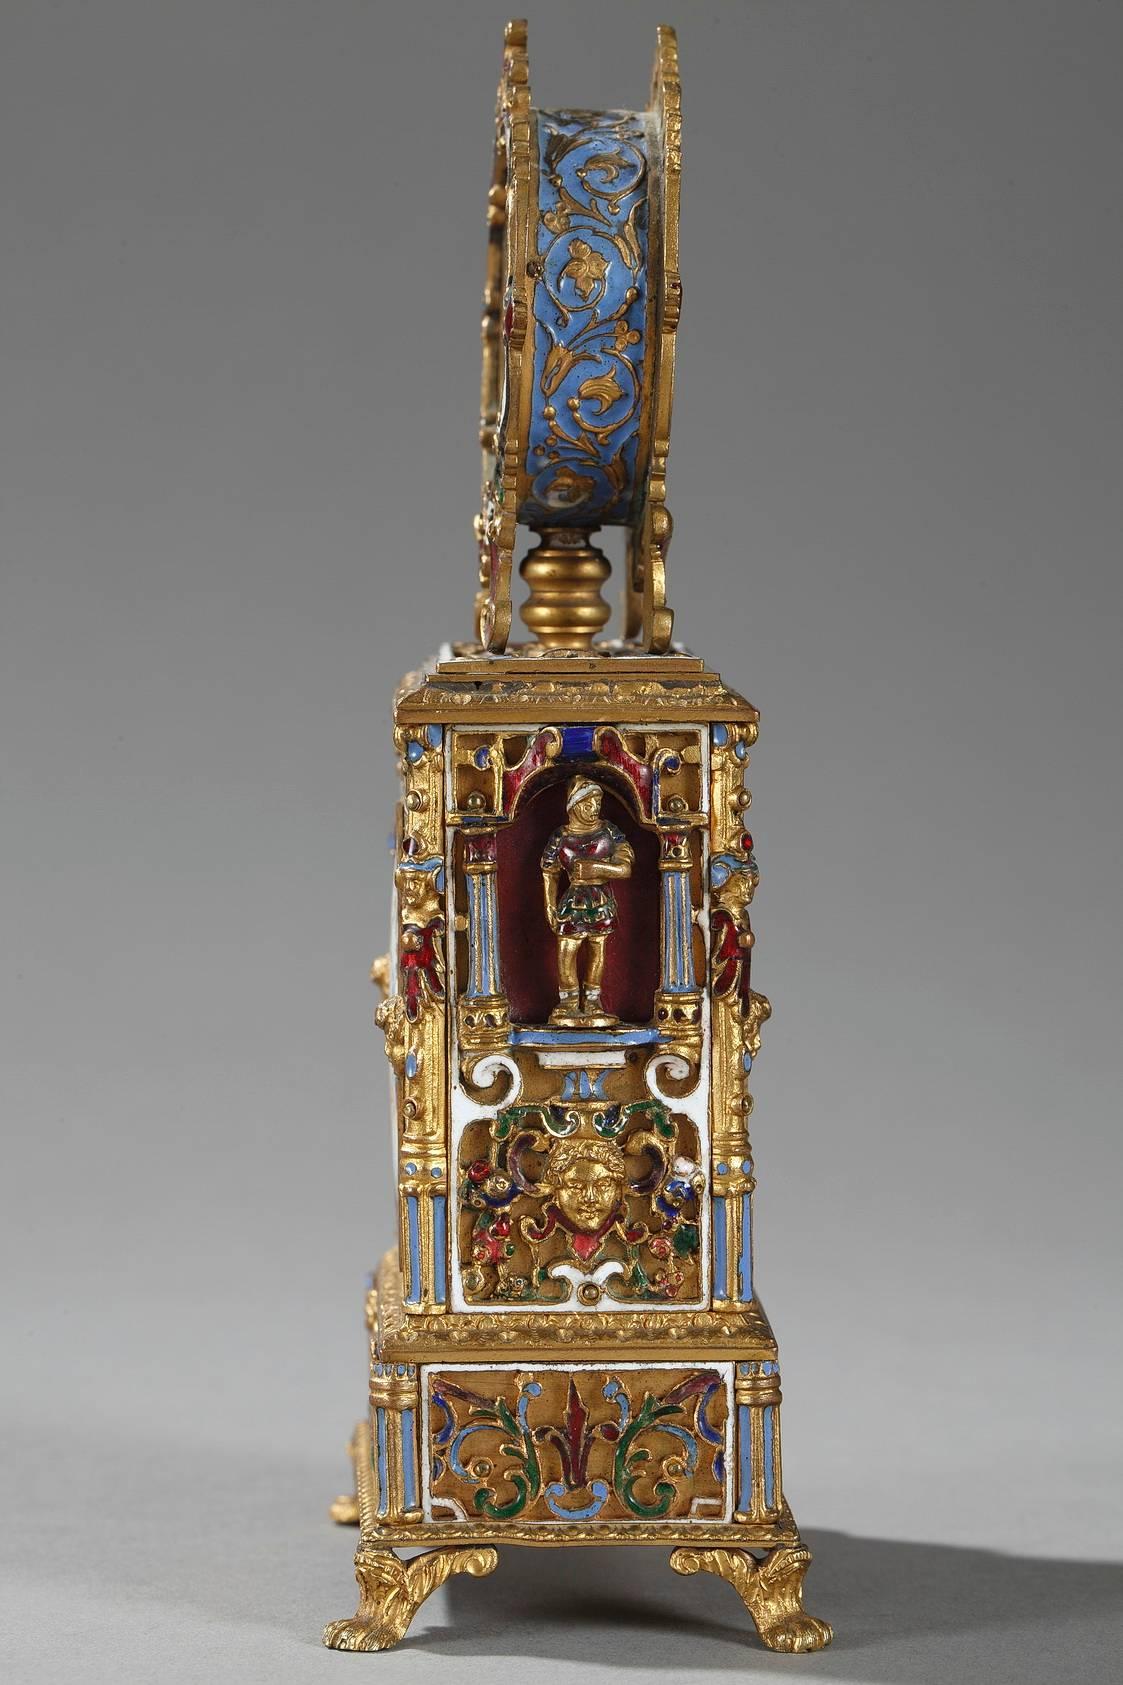 Renaissance Revival Viennese Enamel and Gilt Brass Table Clock, Mid-19th Century For Sale